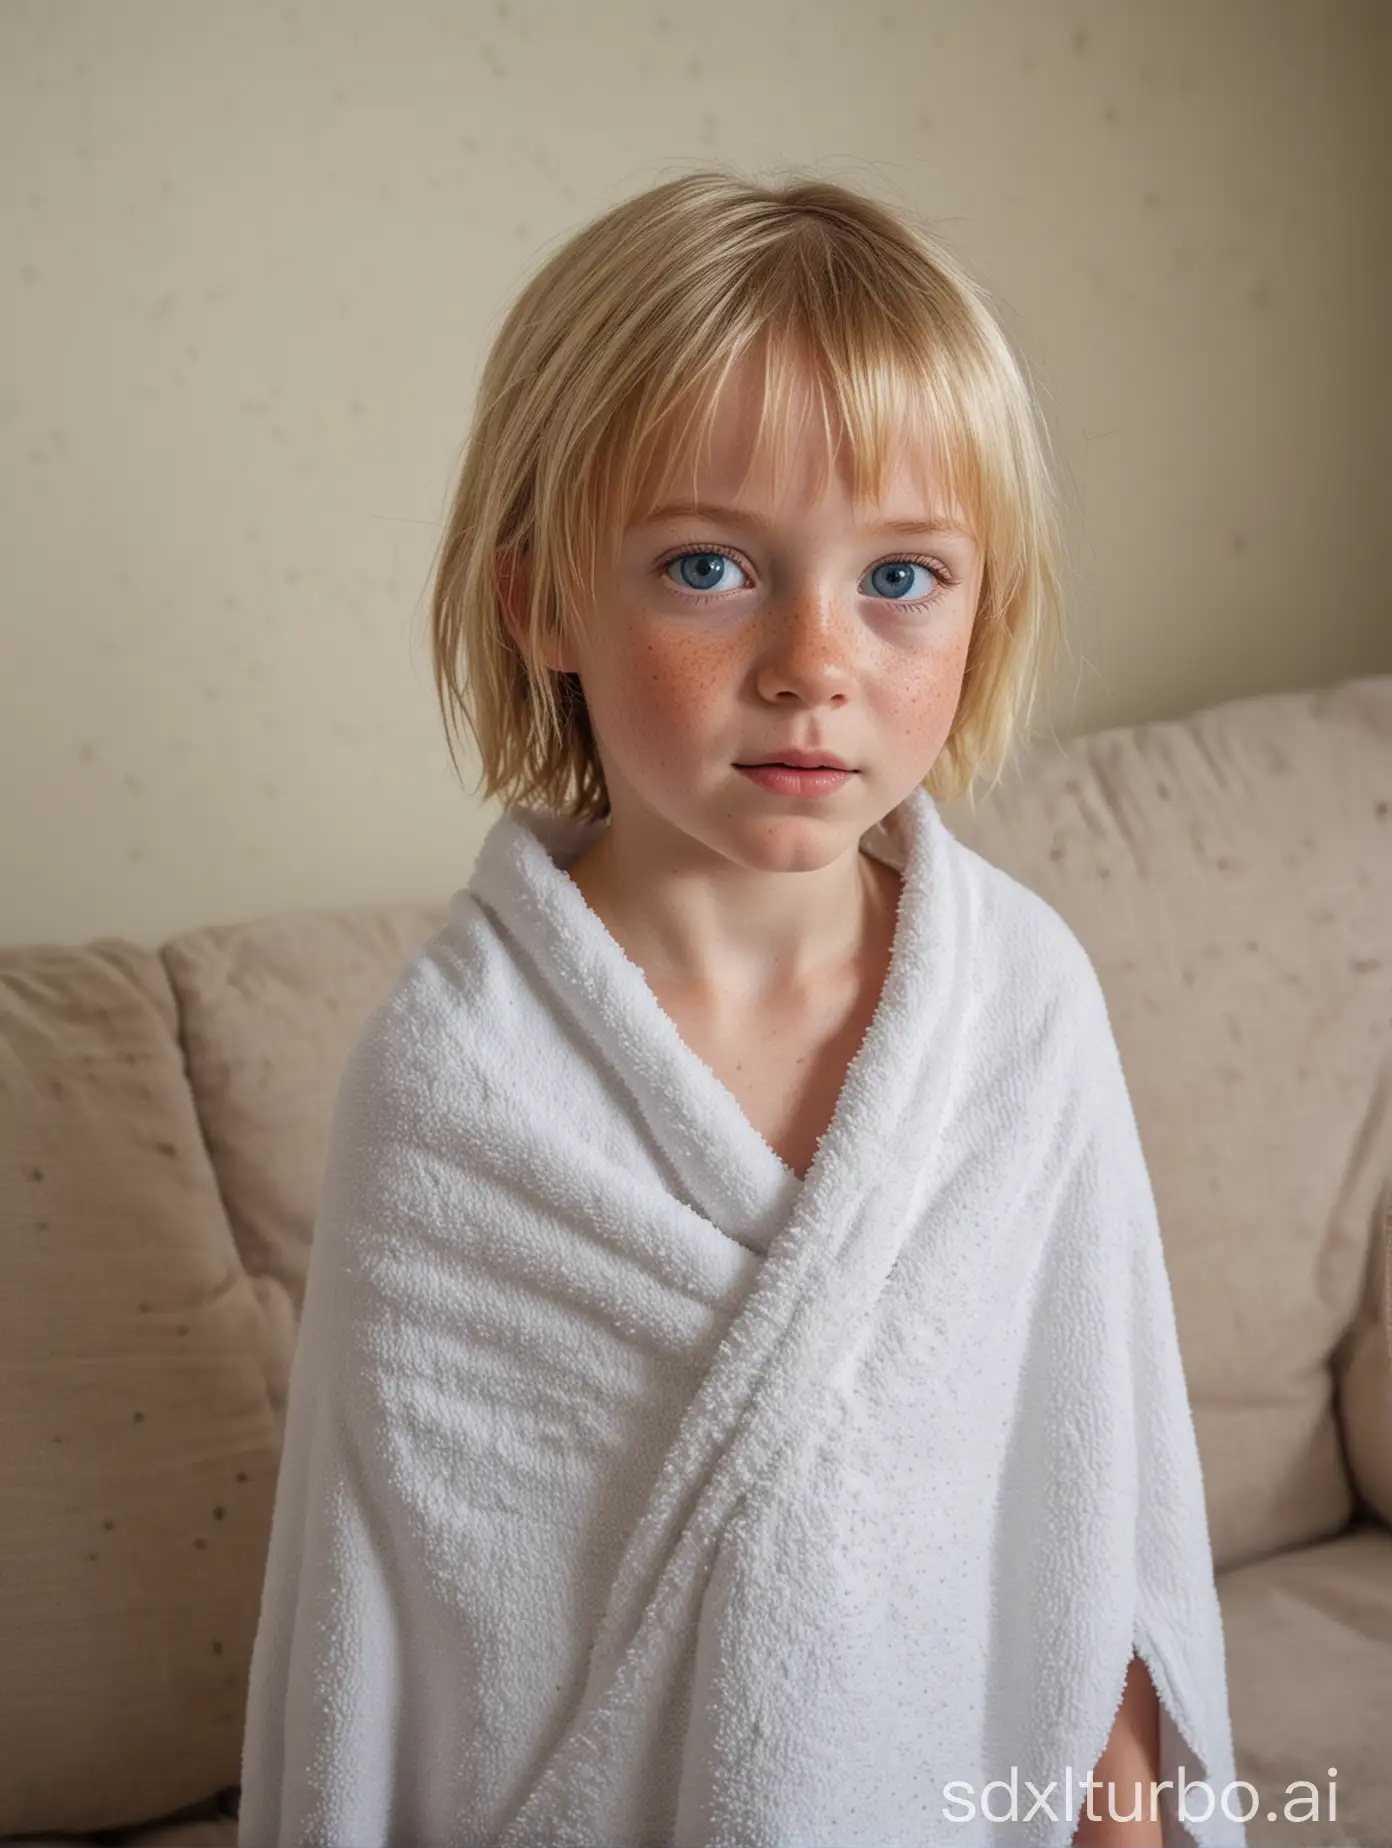 a high definition slr photograph of a little girl with bobbed blonde hair, blue eyes and freckles standing in front of a corner sofa wearing only a towel.